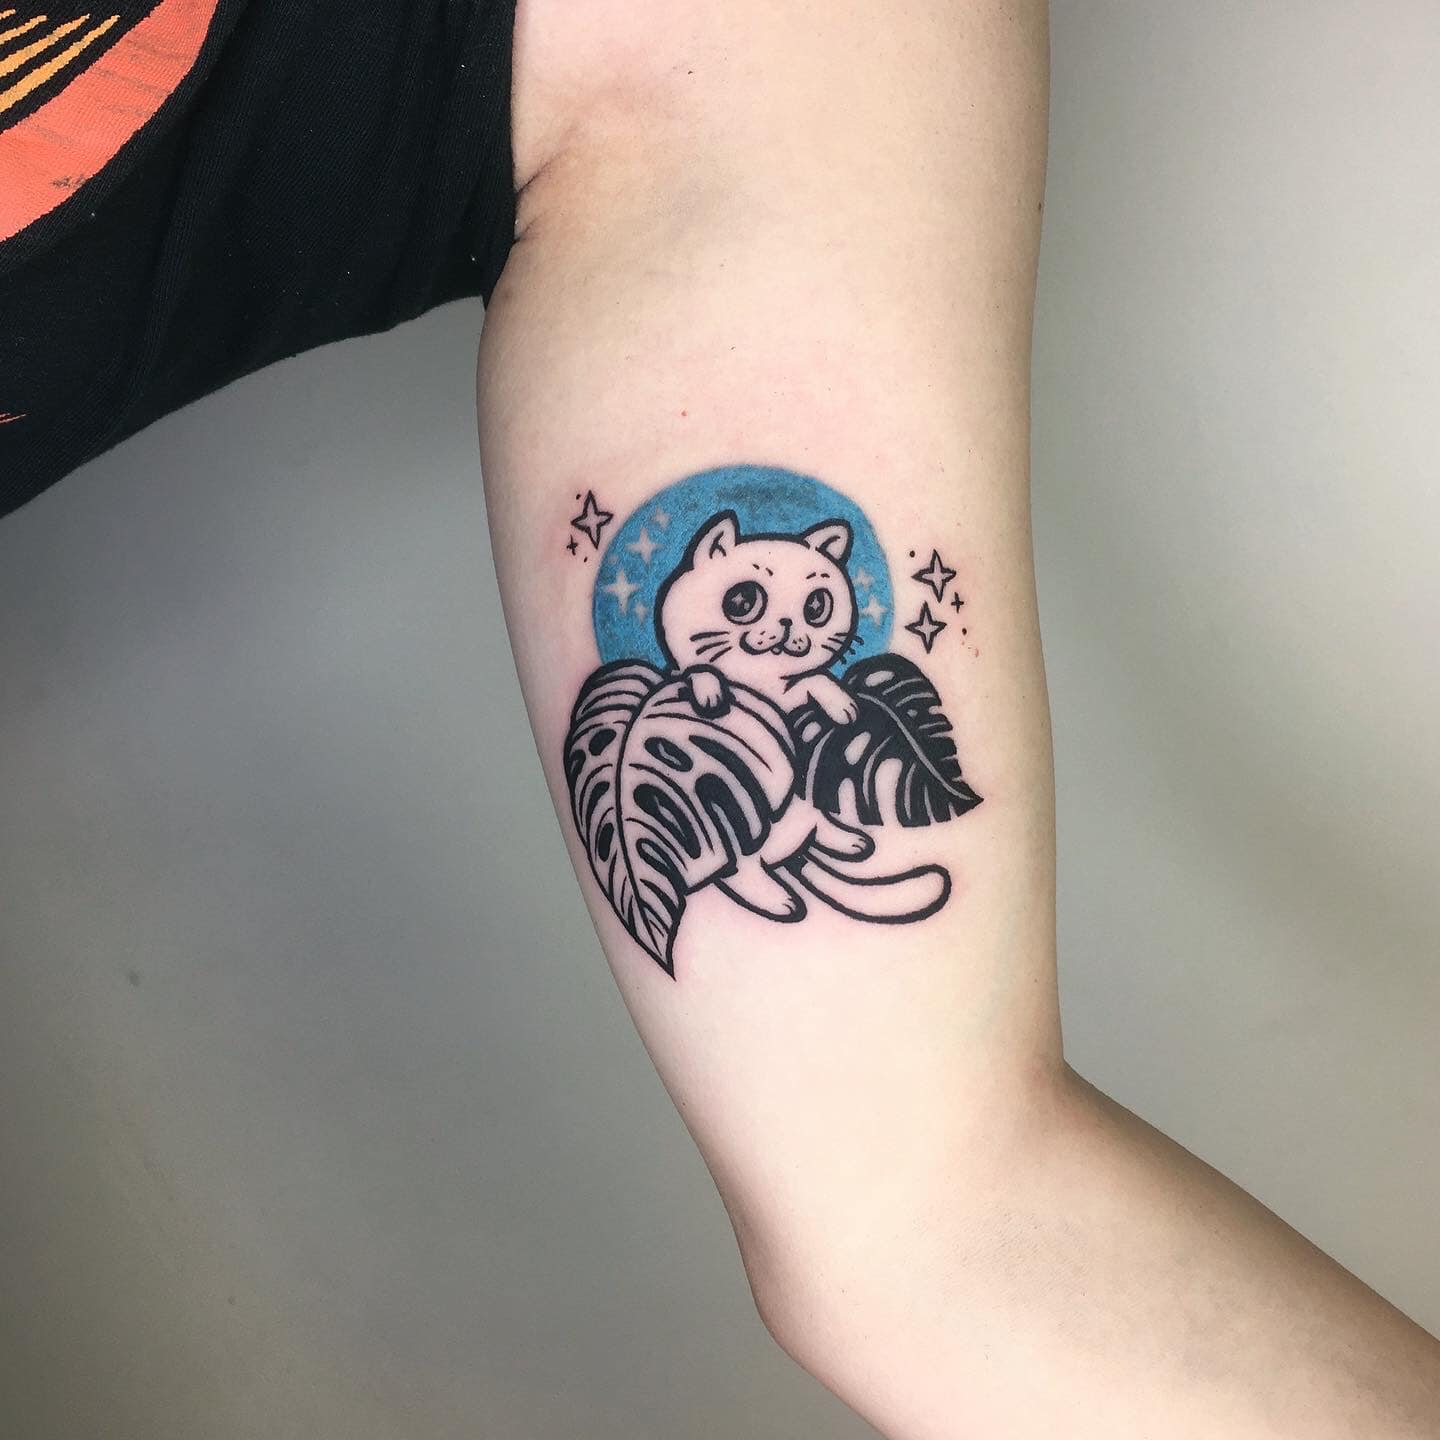 90 Magical Disney Tattoos That Will Inspire You to Get Inked | Mickey tattoo,  Mickey mouse tattoos, Disney tattoos mickey